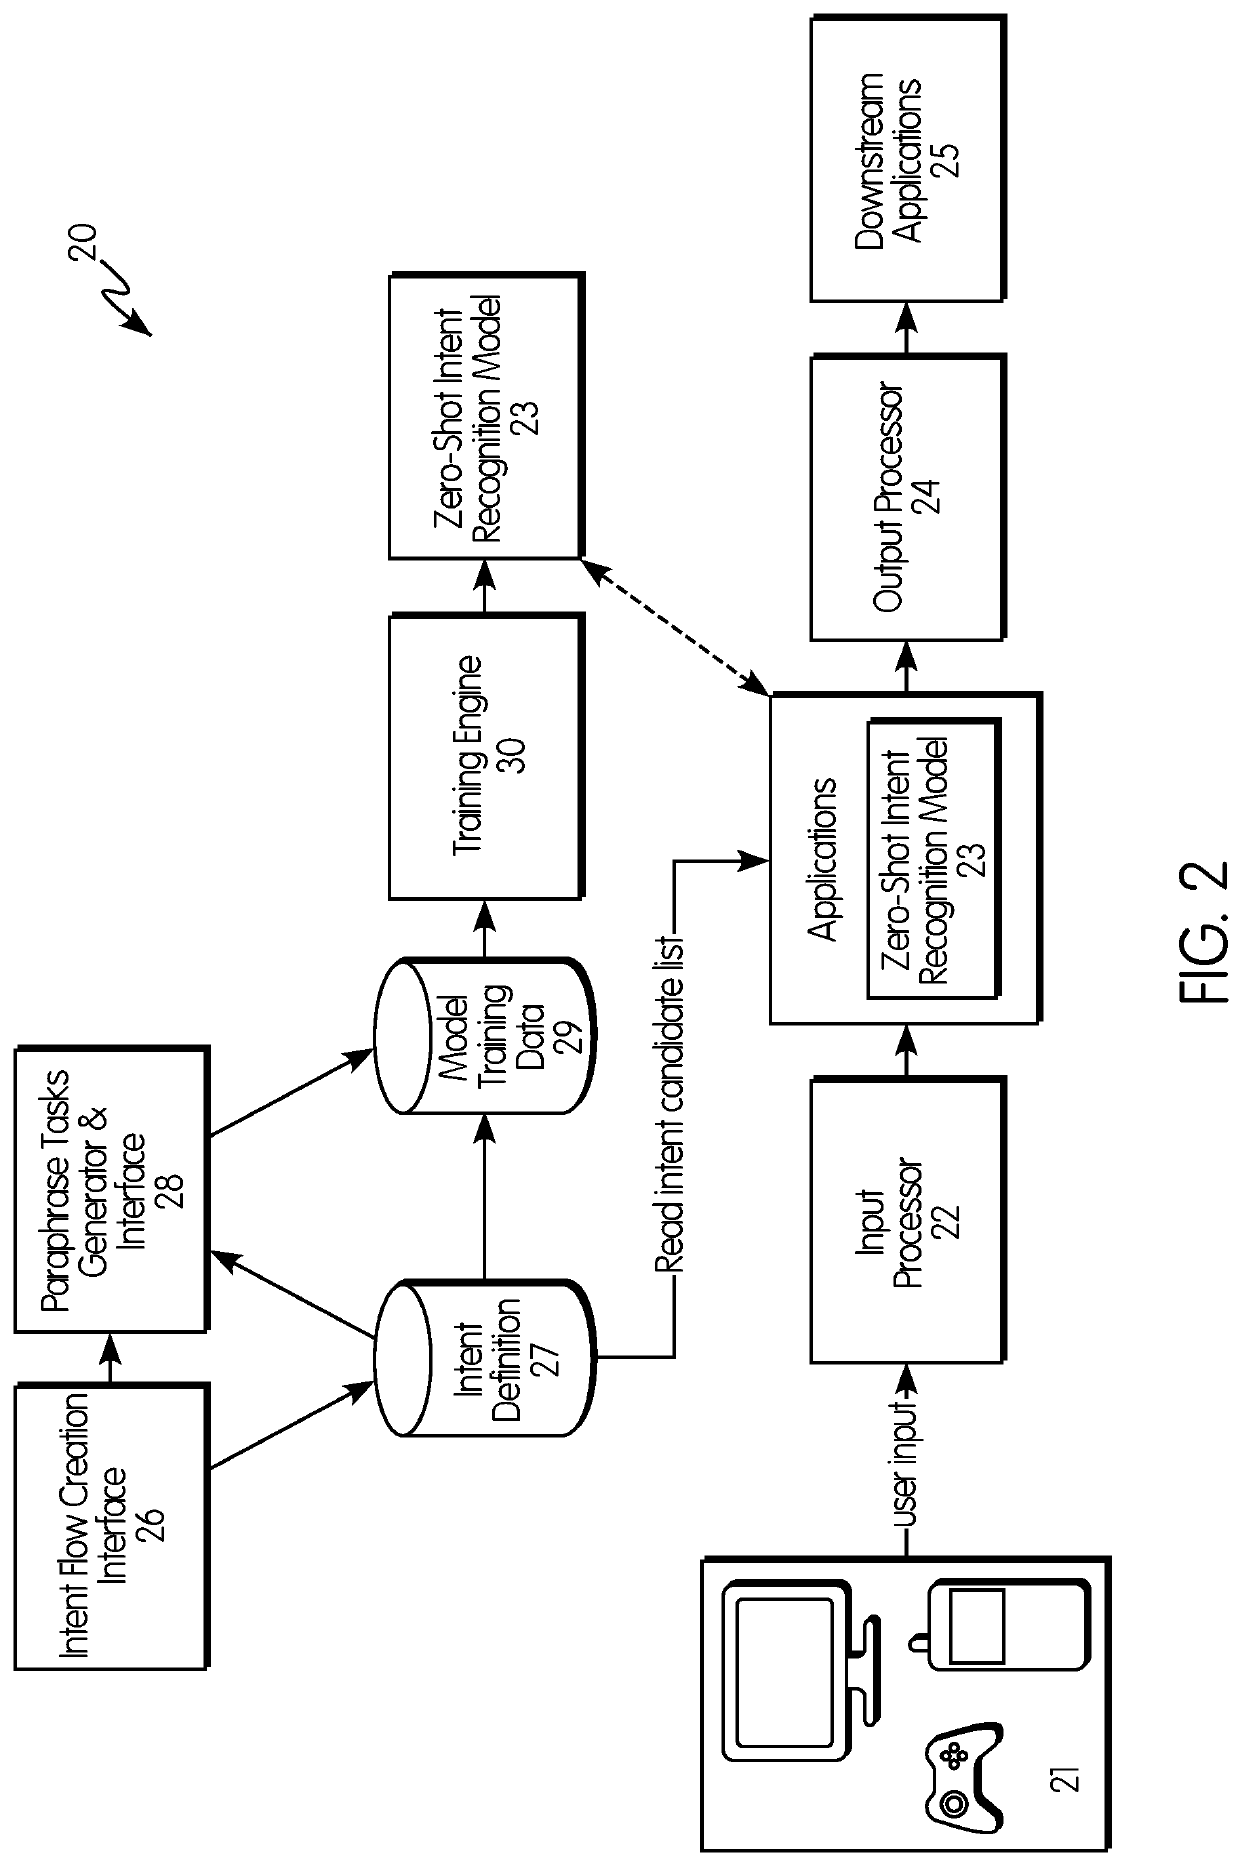 System and method for defining dialog intents and building zero-shot intent recognition models